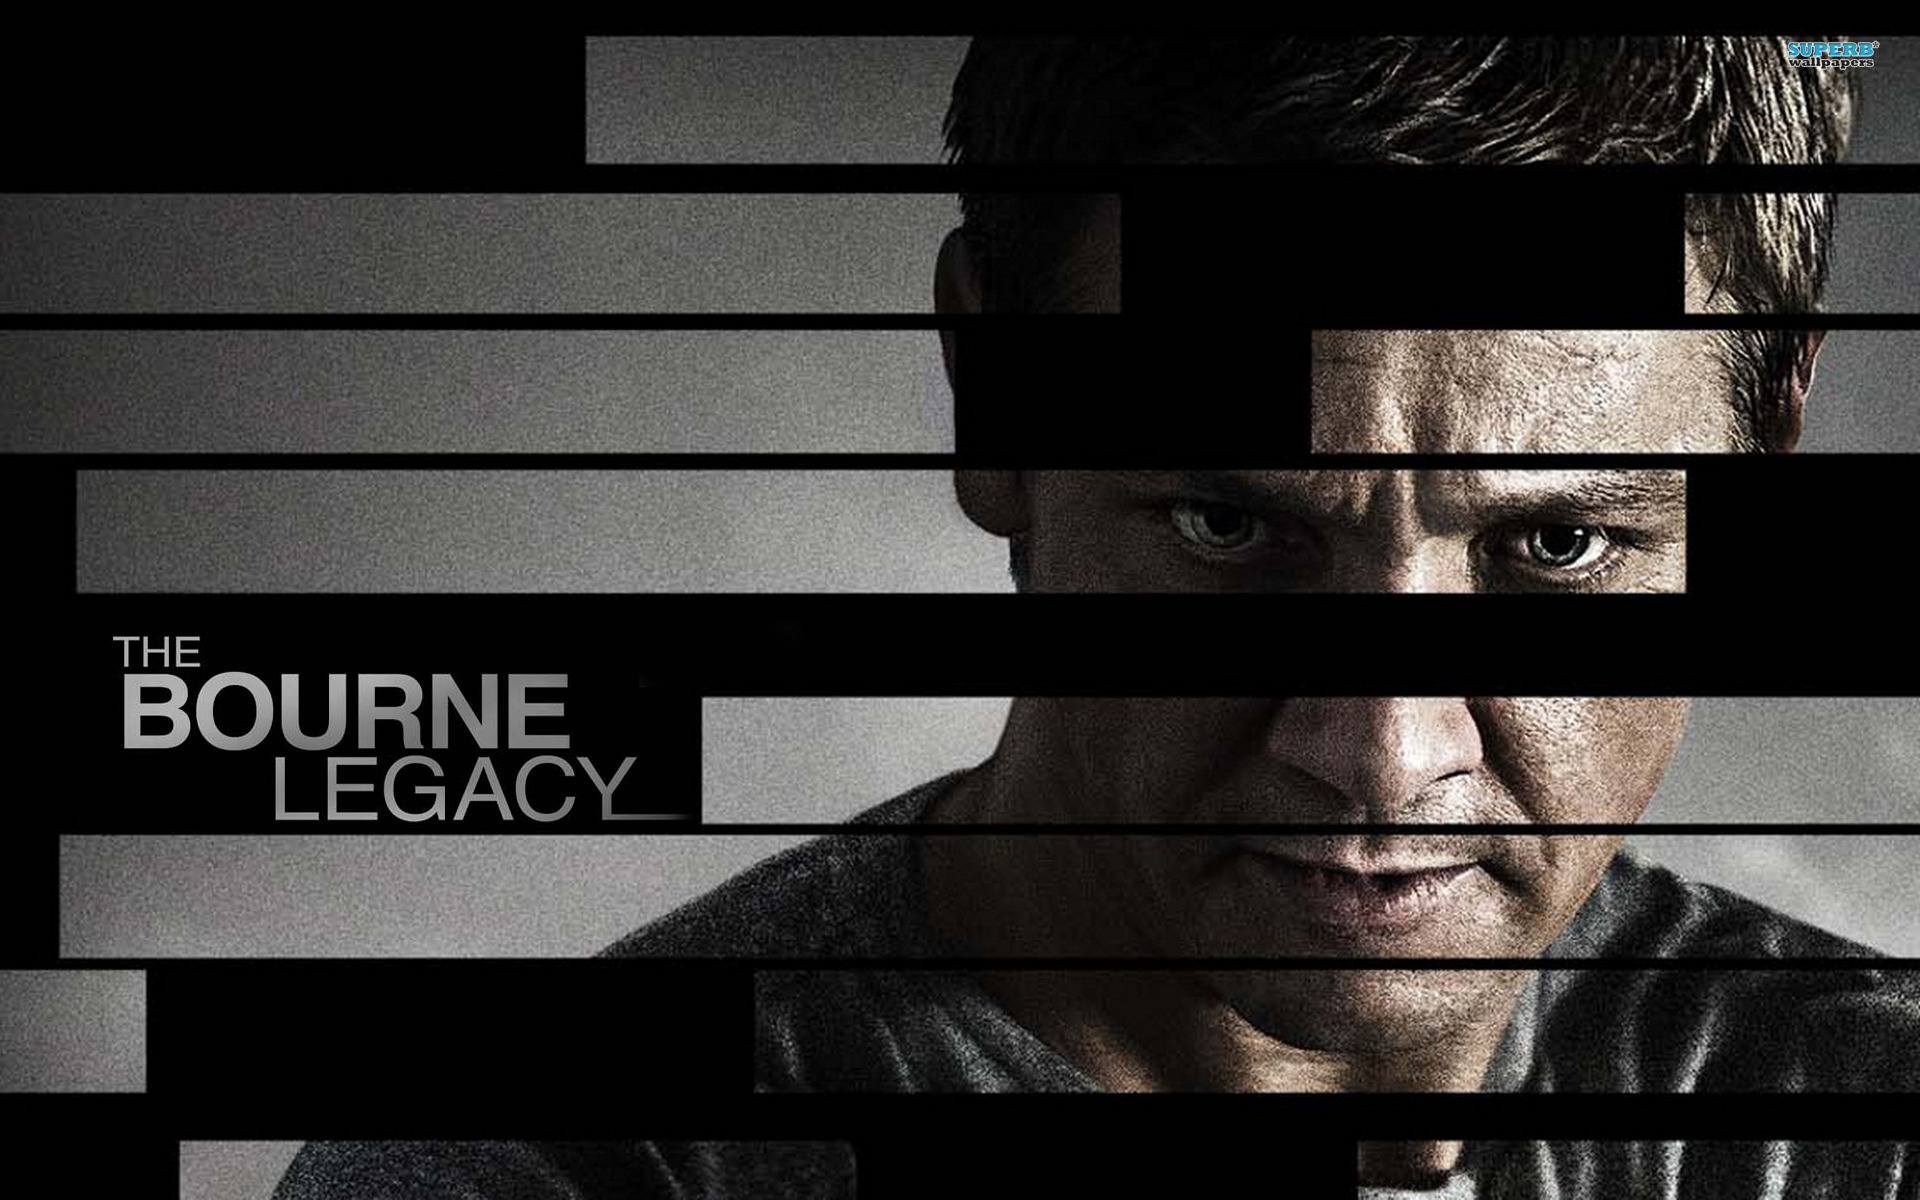 The Bourne Legacy doesn’t need a Bourne to be Badass